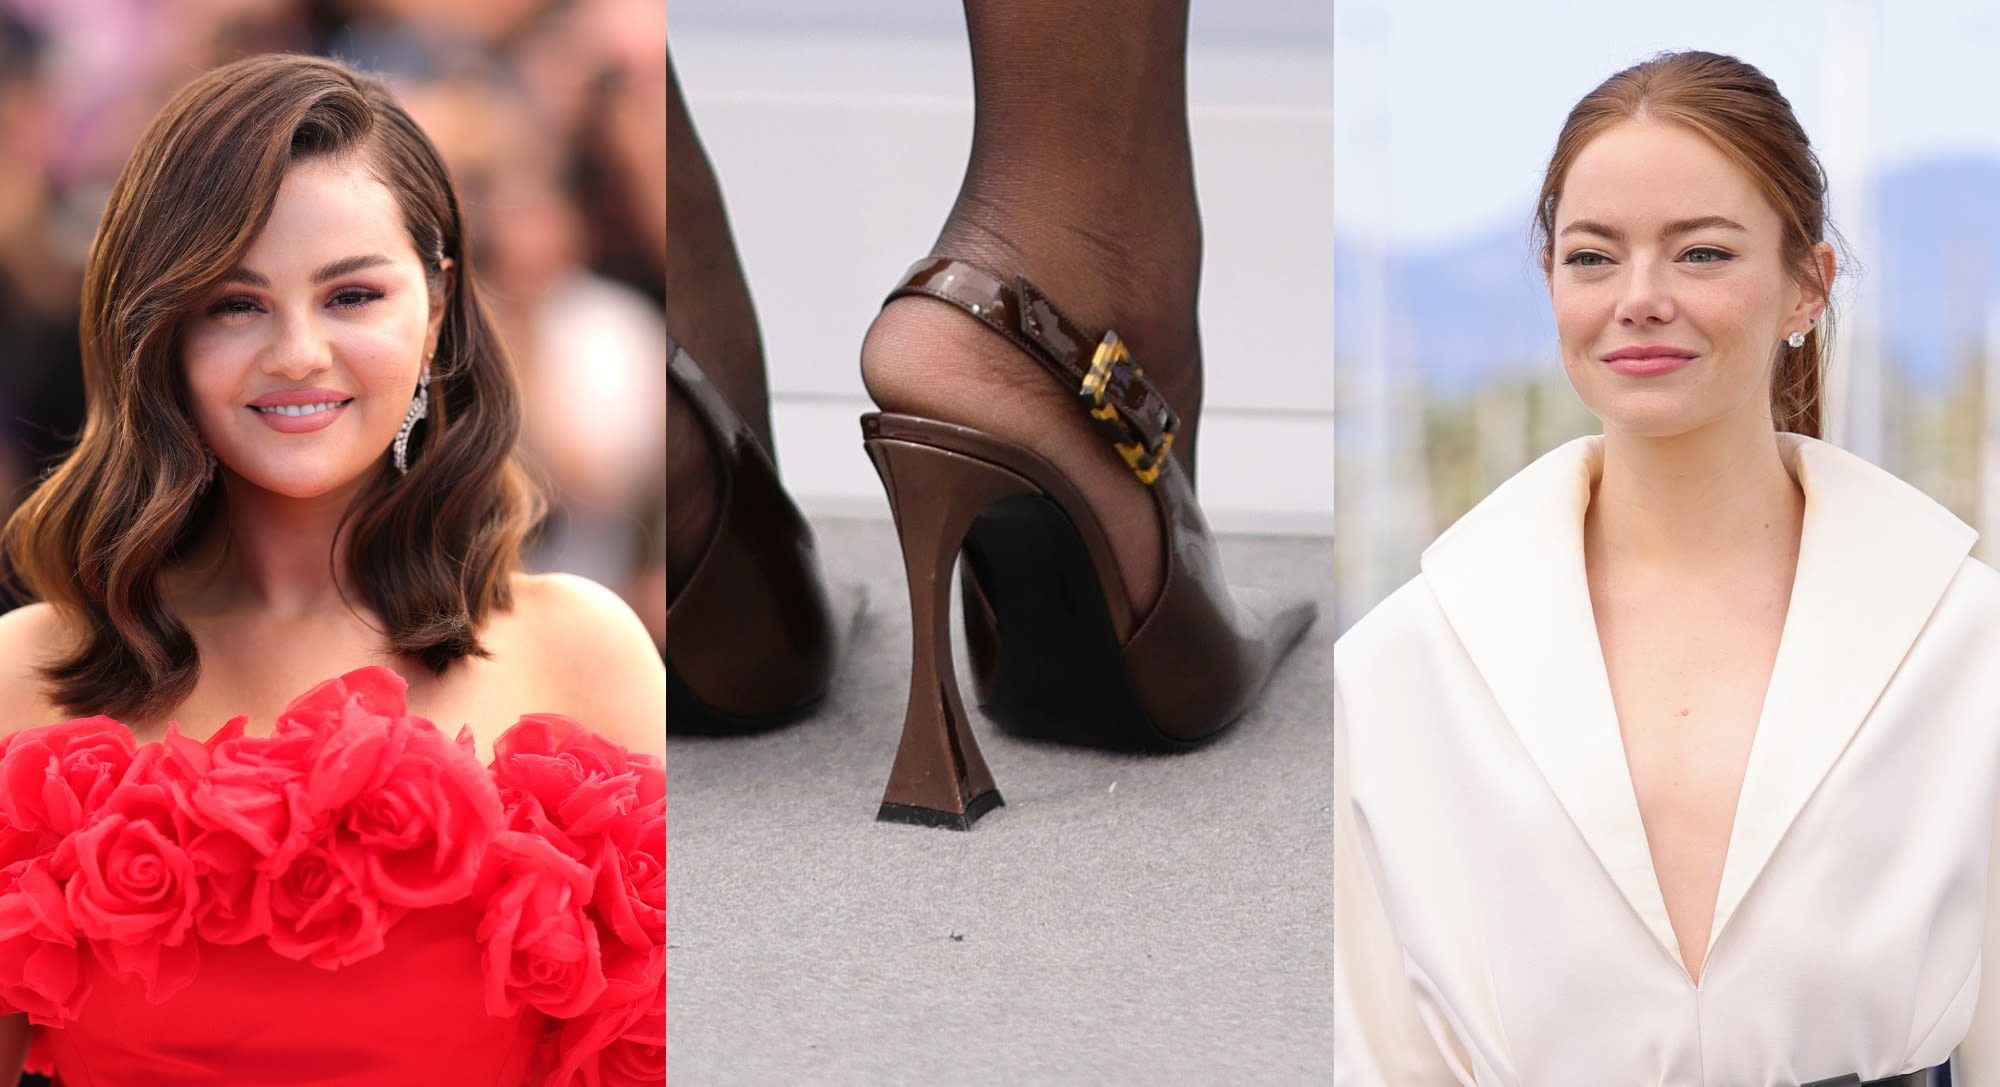 Slingbacks at Cannes Film Festival: The 1950s Shoe Style Trends With Selena Gomez, Uma Thurman and Hunter Schafer